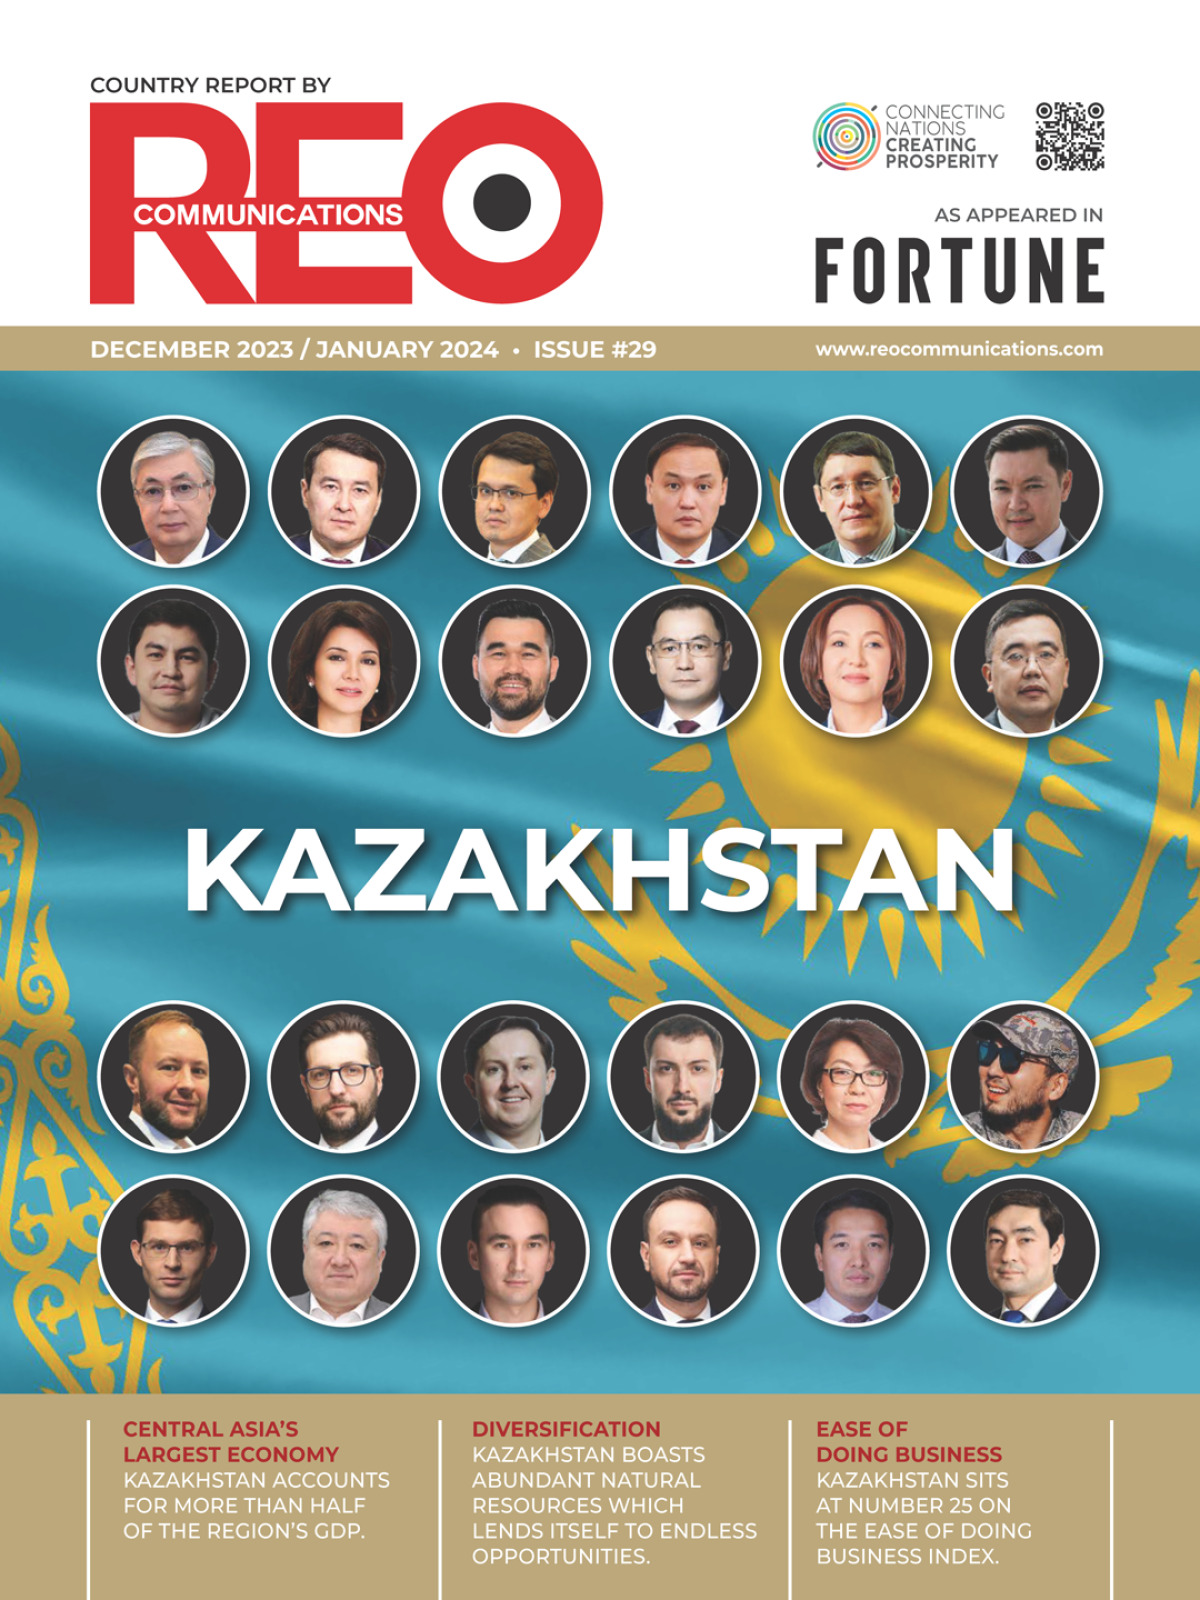 AG TECH | Interview with Alexander Podvalov in Fortune magazine as part of a special report on Kazakhstan by REO Communications.